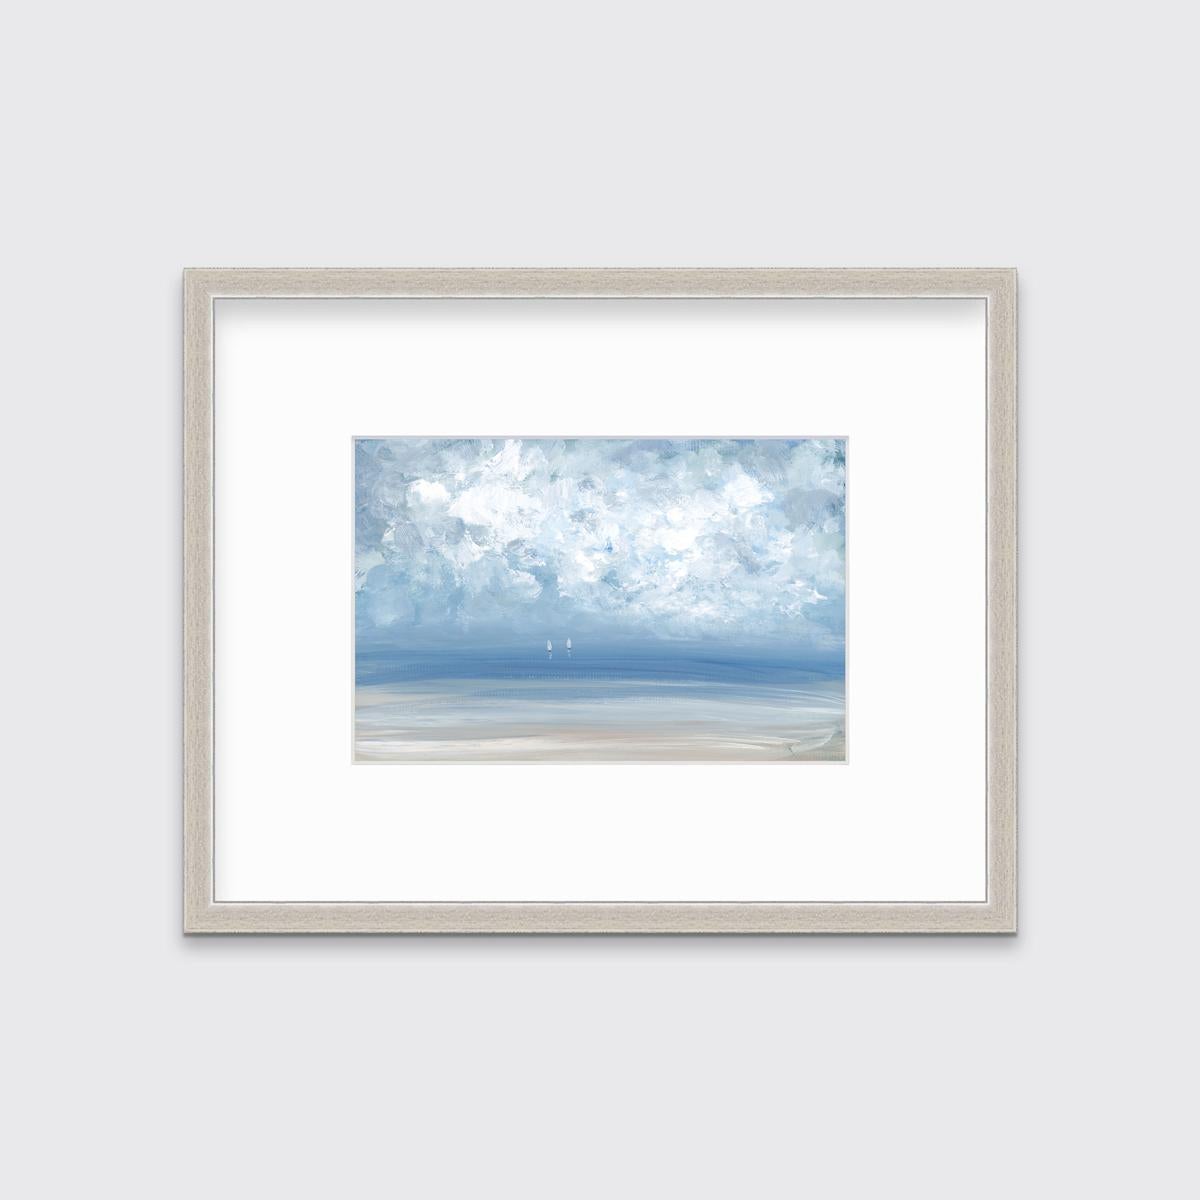 S. Cora Aldo Landscape Print - "High Clouds, " Framed Limited Edition Giclee Print, 6" x 9"